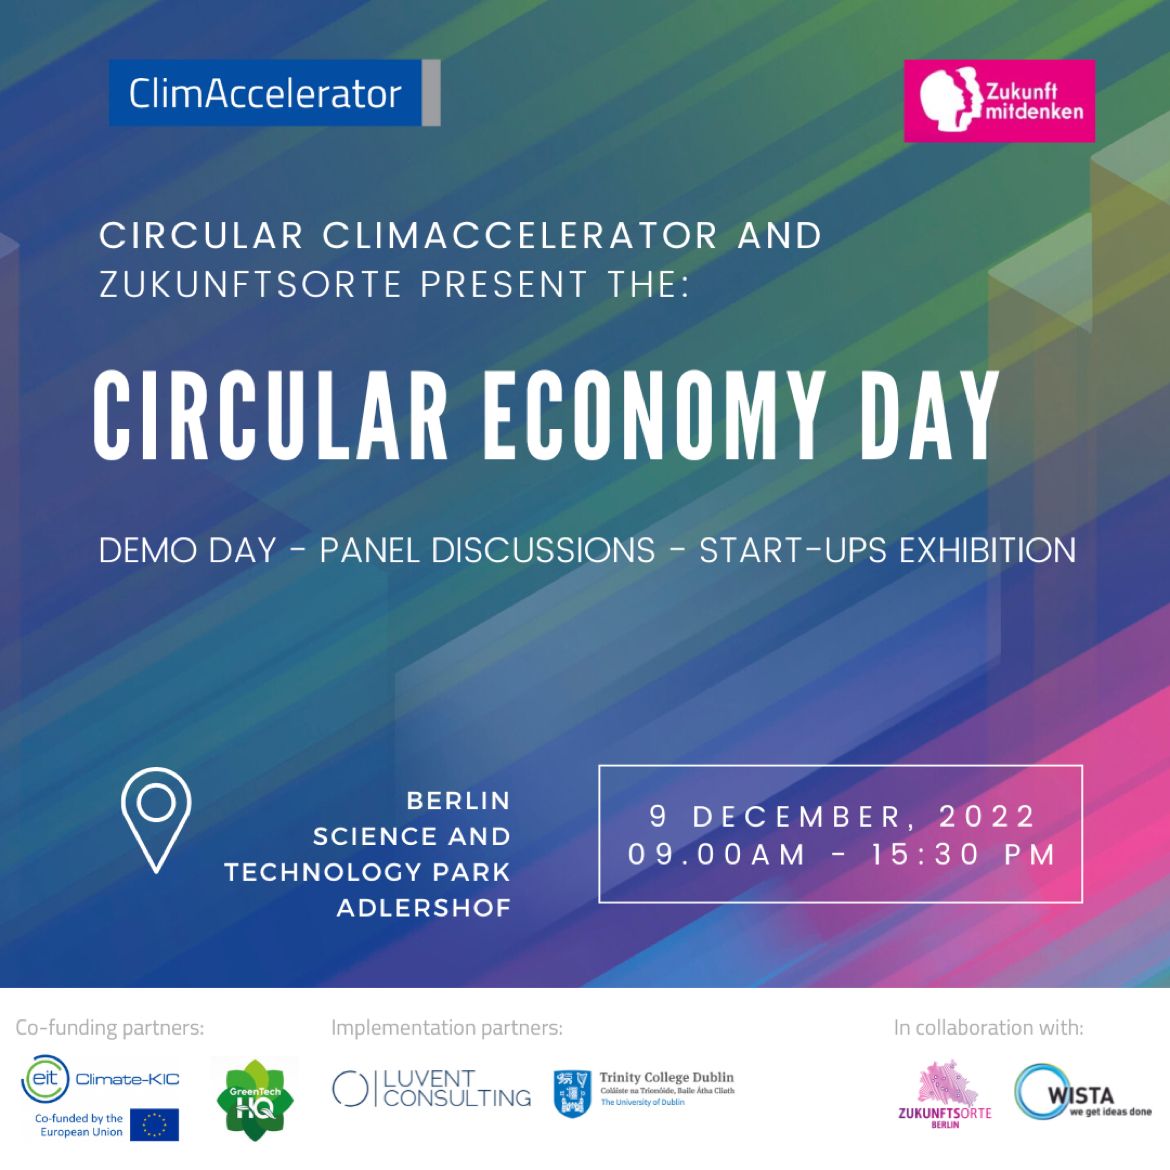 ReLearn at the Circular Economy Day in Berlin